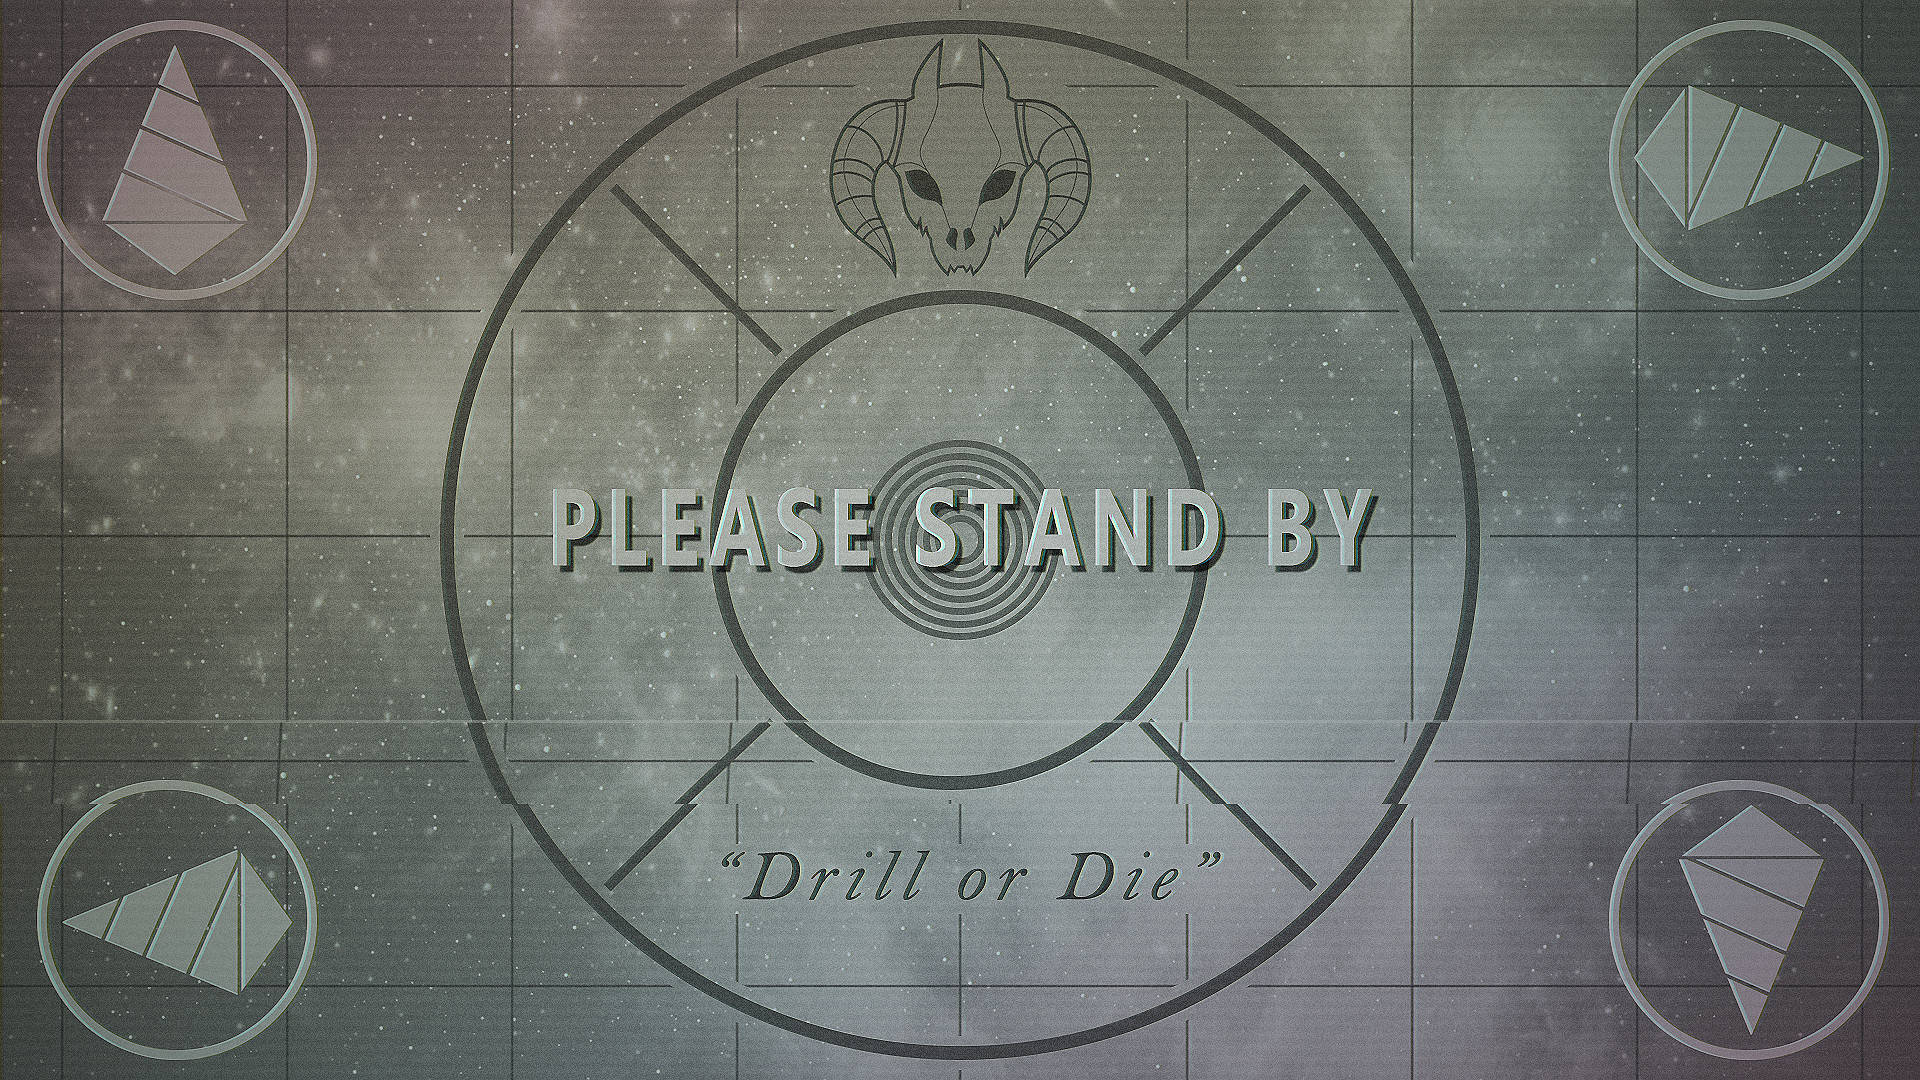 Vintage Grayscale 'Please Stand By' Signal Image Wallpaper